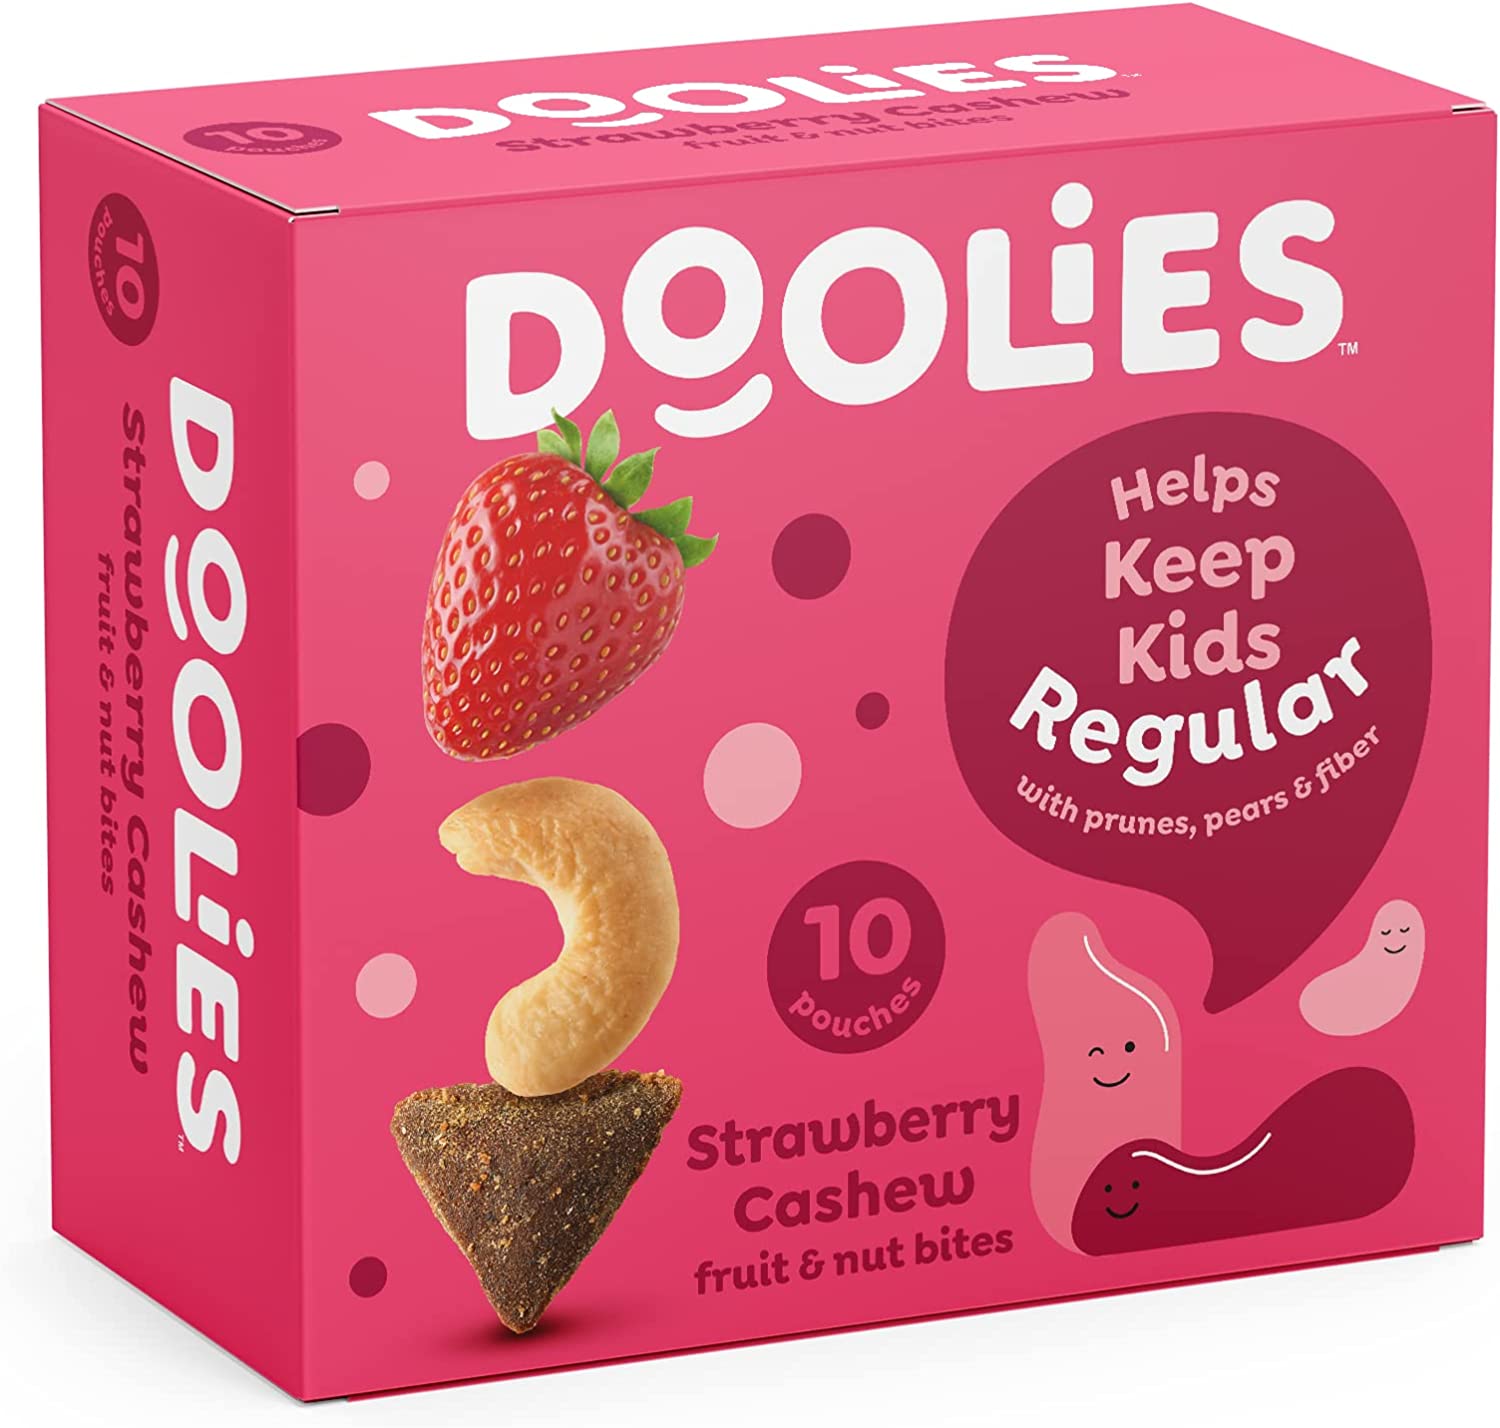 Doolies Tummy-Friendly Fiber Snack Helps Restore Regularity & Keeps Children & Kids Digestive Systems Running Smoothly Strawberry Real Fruit – 10 Pack